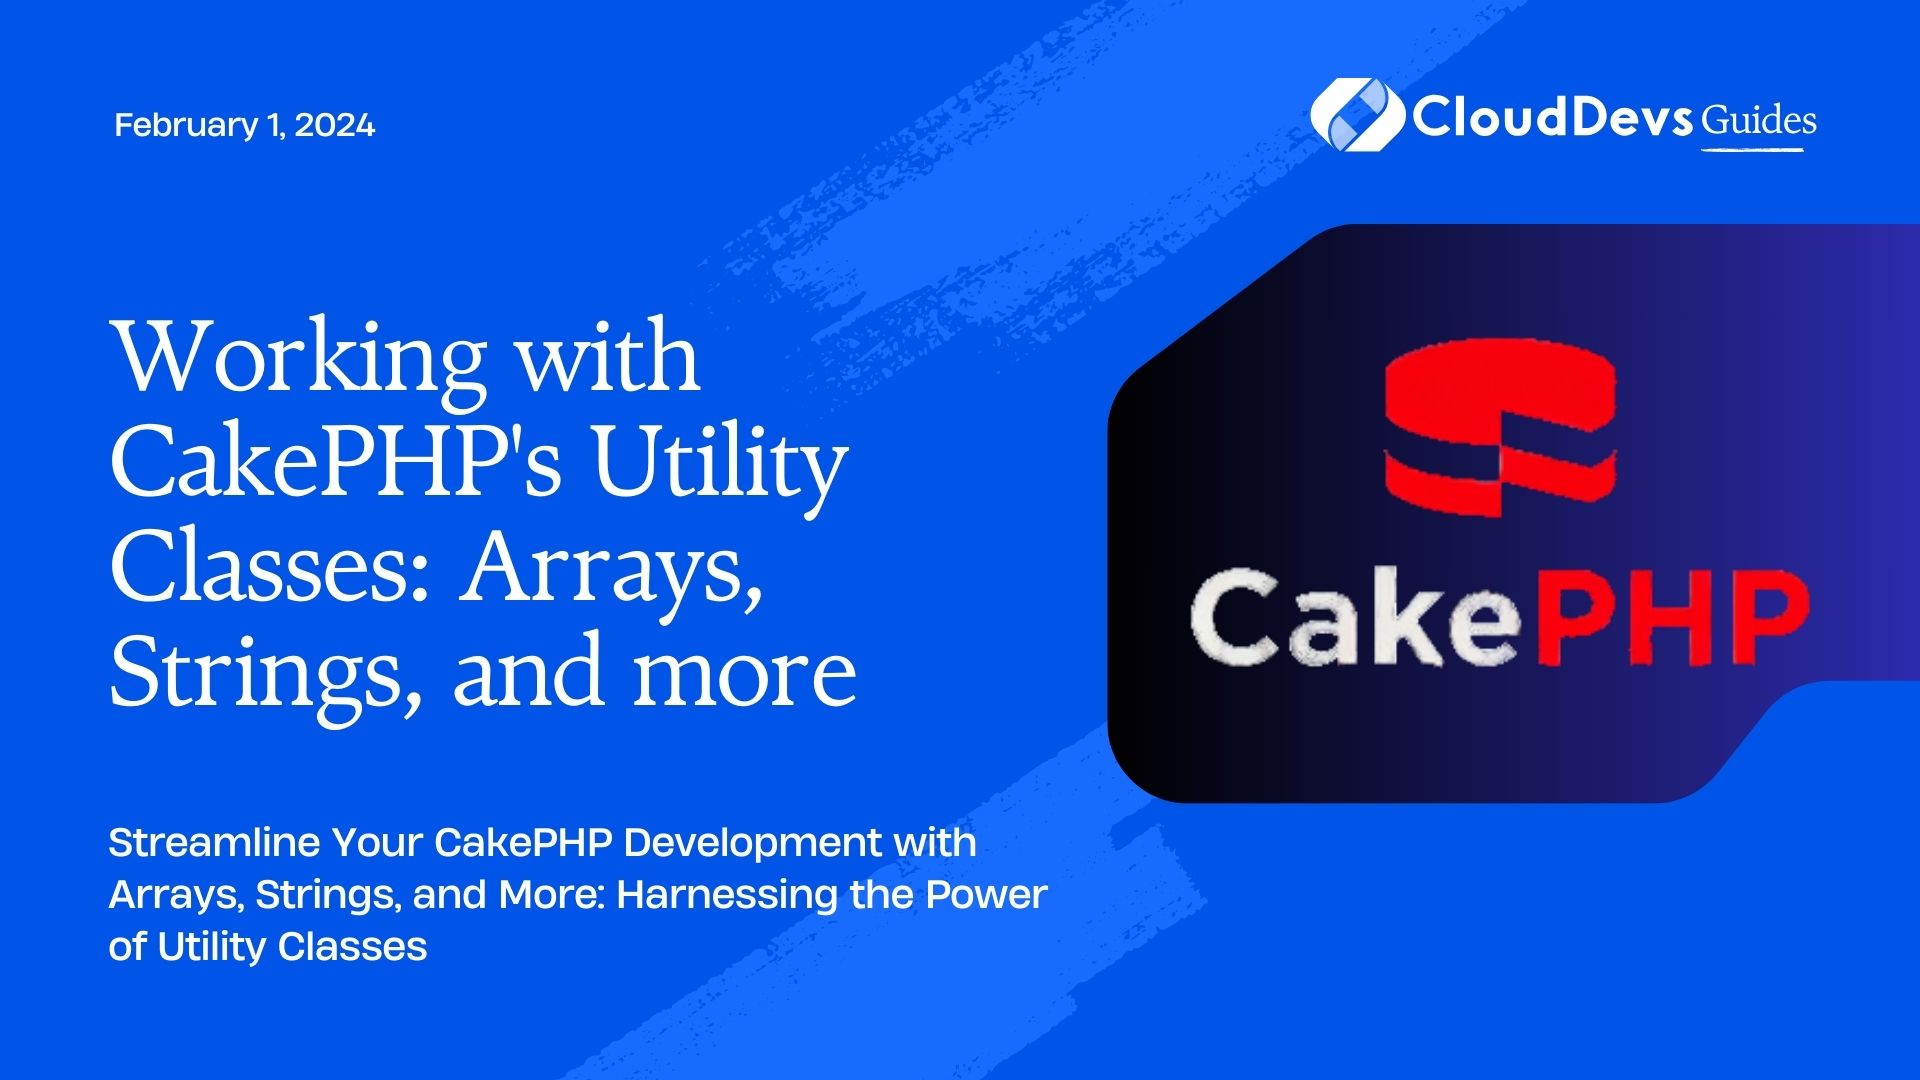 Working with CakePHP's Utility Classes: Arrays, Strings, and more